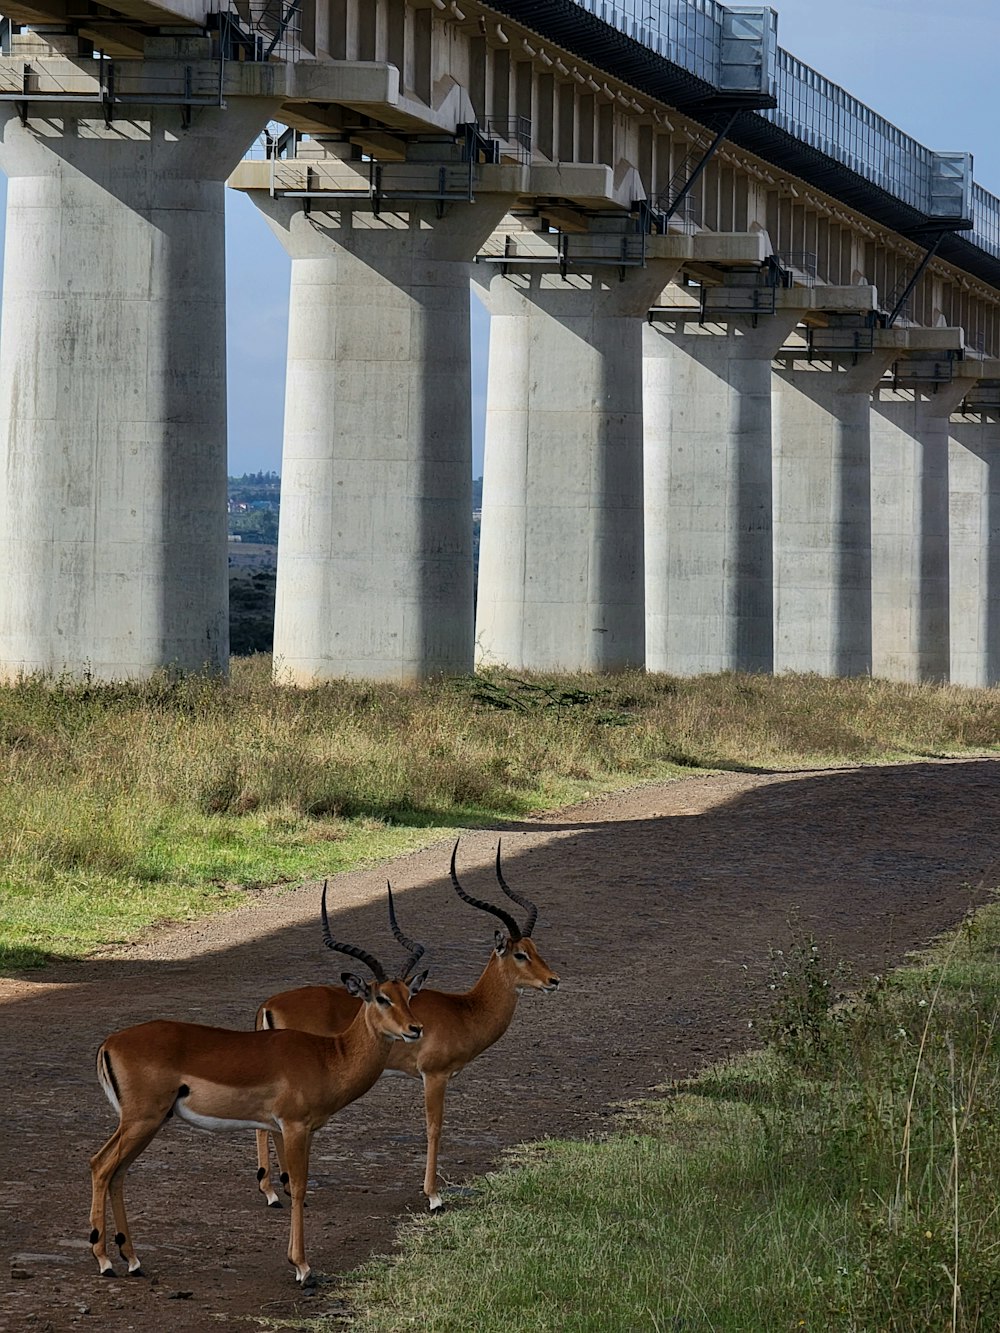 two antelope standing on a dirt road under a bridge